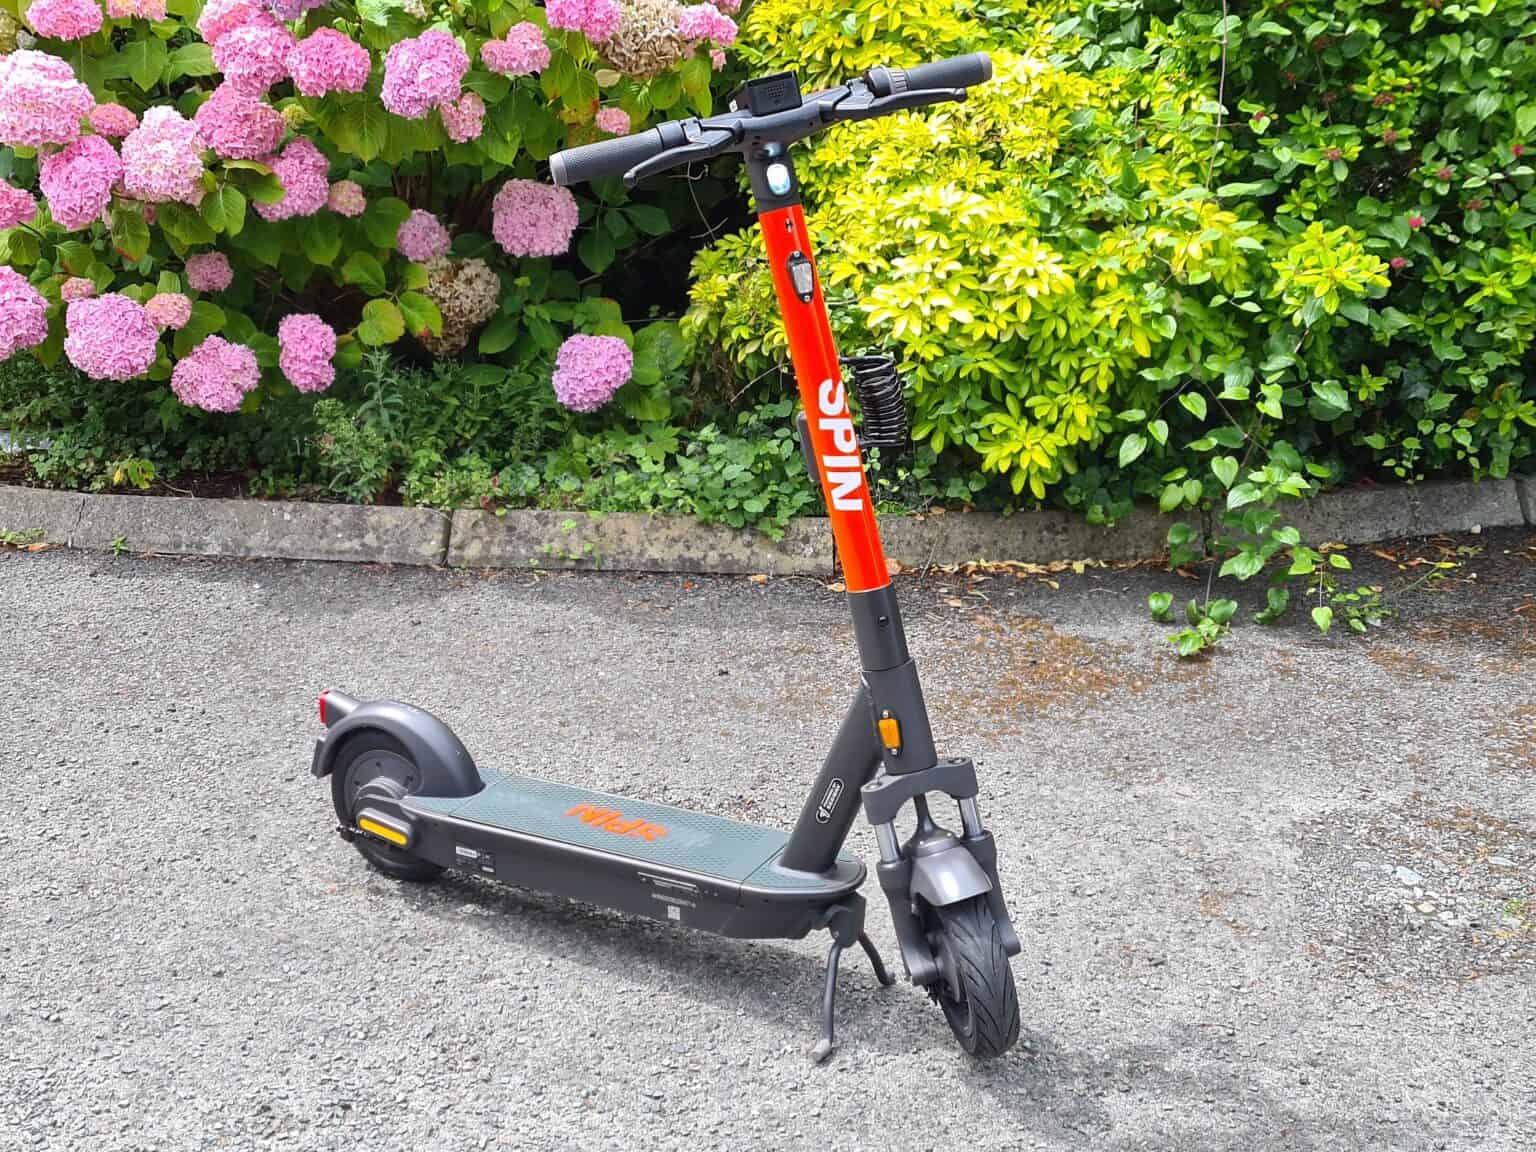 SPIN e-scooters - A New Mode of Transport, Coming To A City Near You SOON. - Motoring Matters